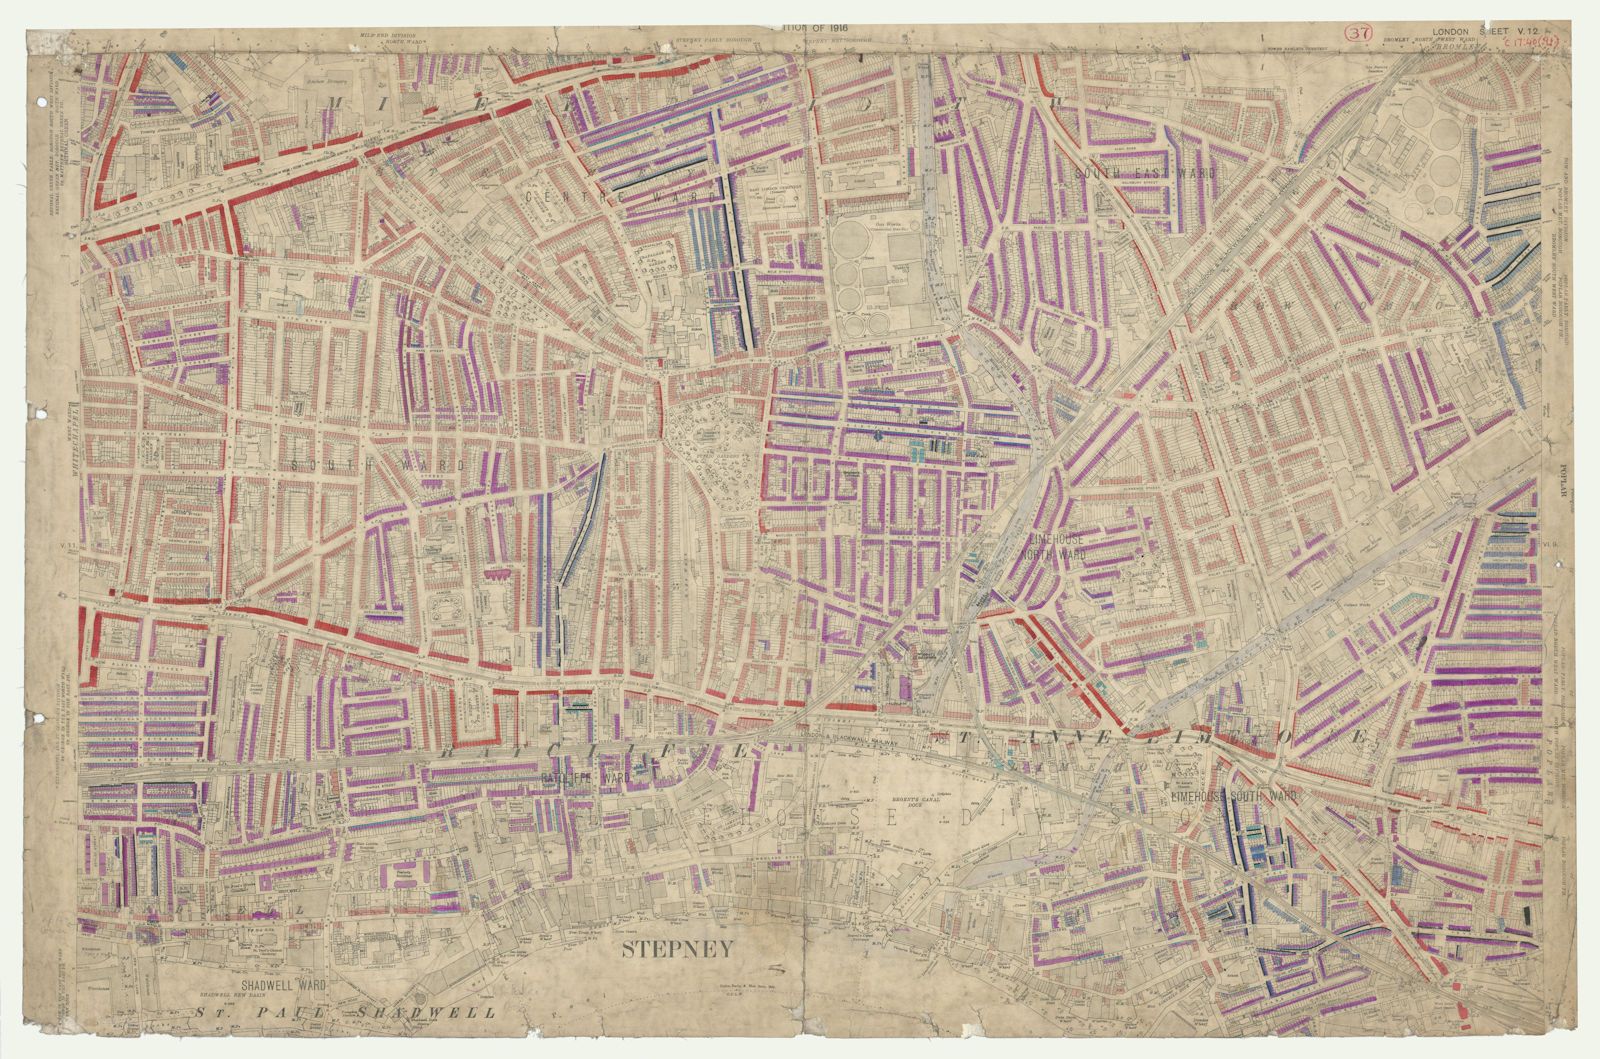 LSE POVERTY OS PROOF MAP East End - Limehouse - Shadwell - Wapping 1928